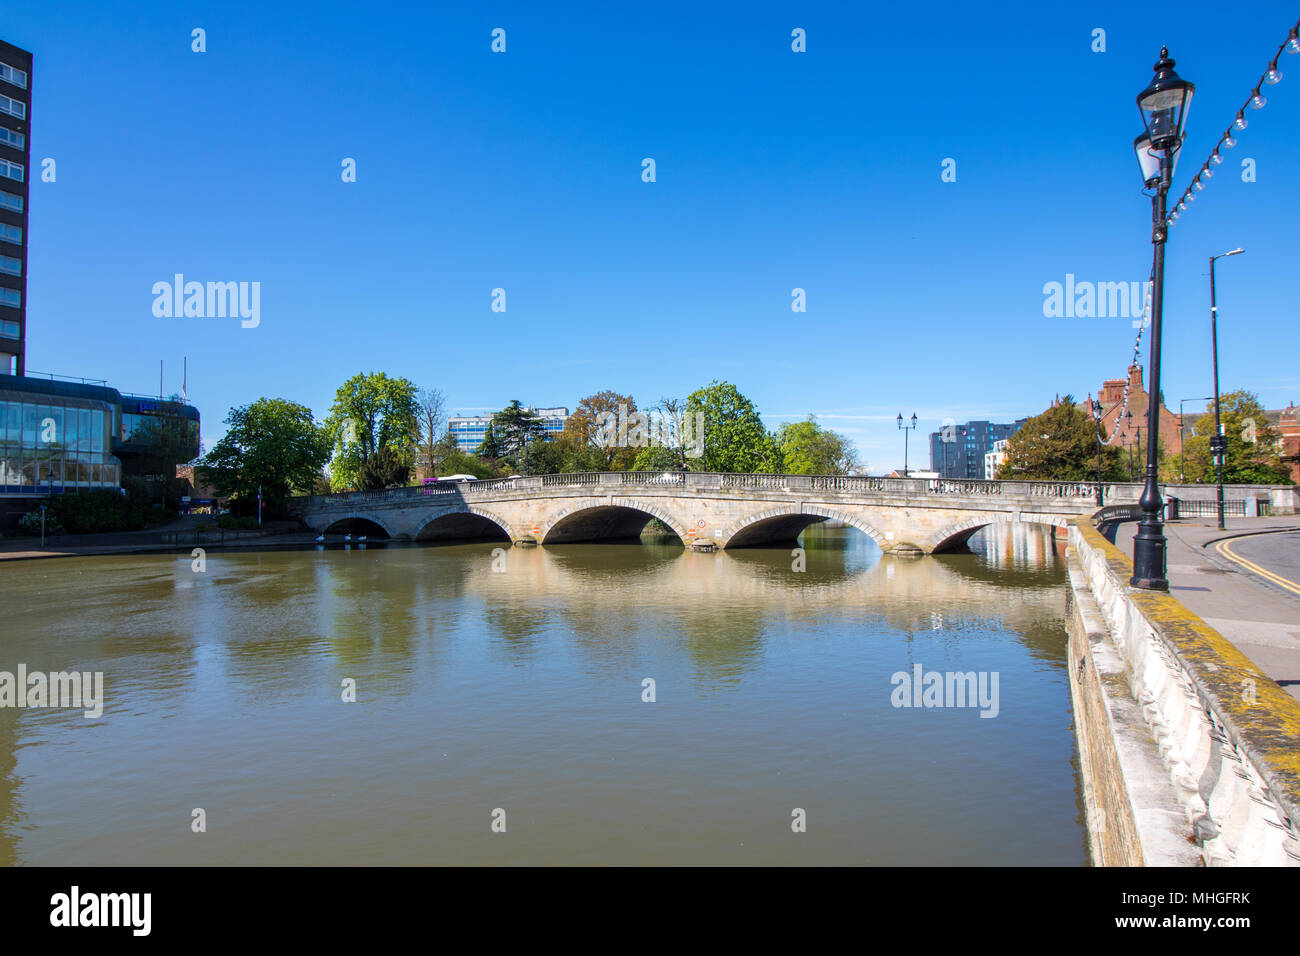 The River Great Ouse flows peacefully through Town Bridge in Bedford, UK Stock Photo